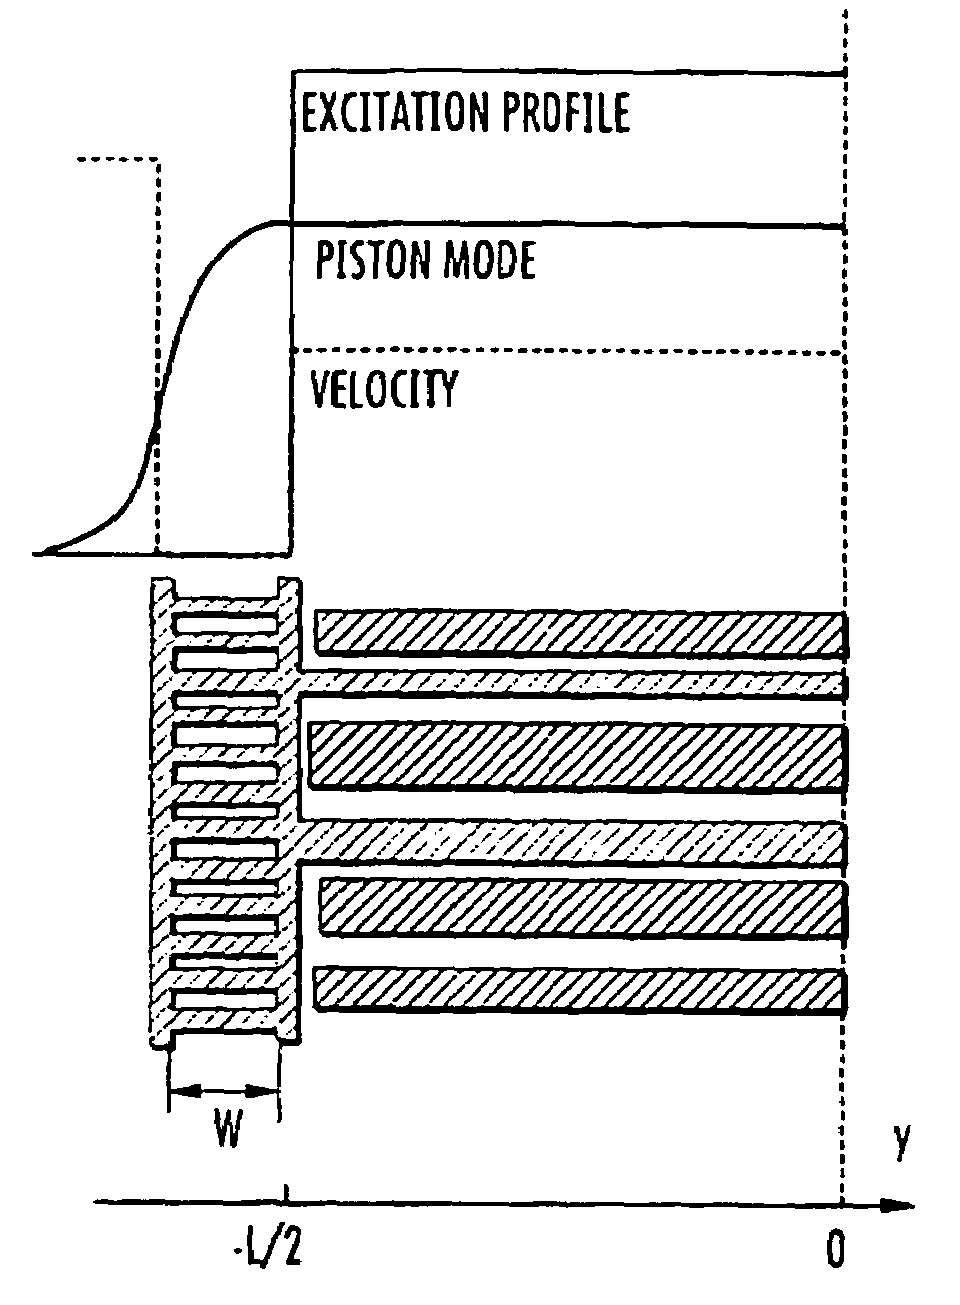 SAW filter operable in a piston mode